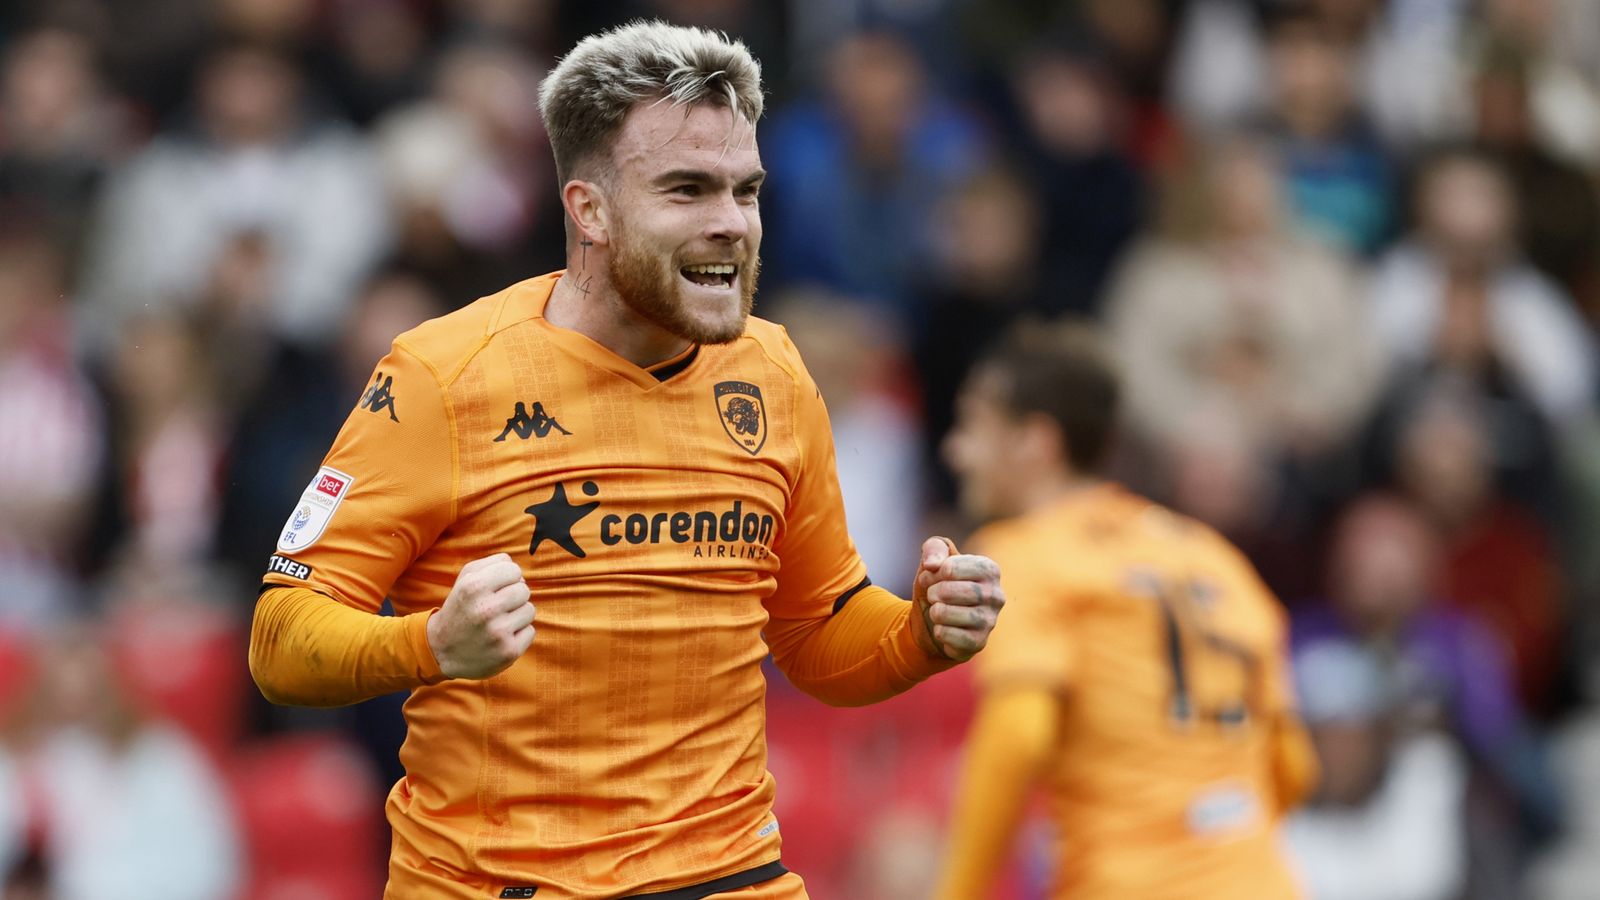 Stoke City 1-3 Hull City: Aaron Connolly scores fifth goal of season in  comfortable Tigers win | Football News | Sky Sports